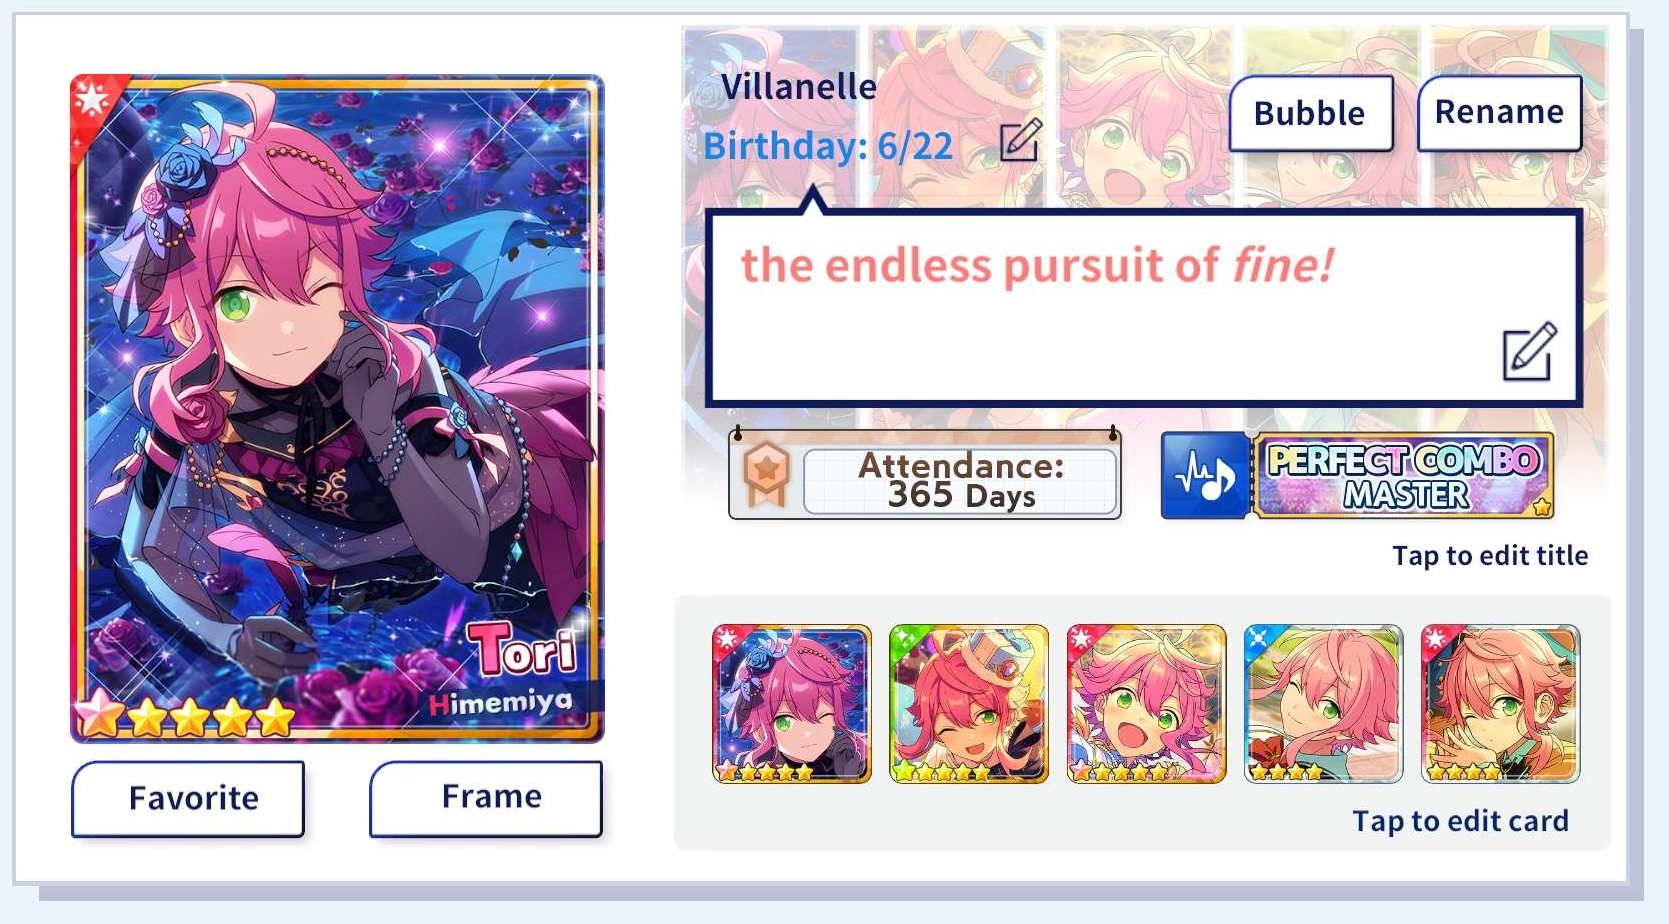 A screenshot of my Ensemble Stars profile with lots of Tori images. My username is Villanelle, and my status reads: The endless pursuit of fine! in pink text.